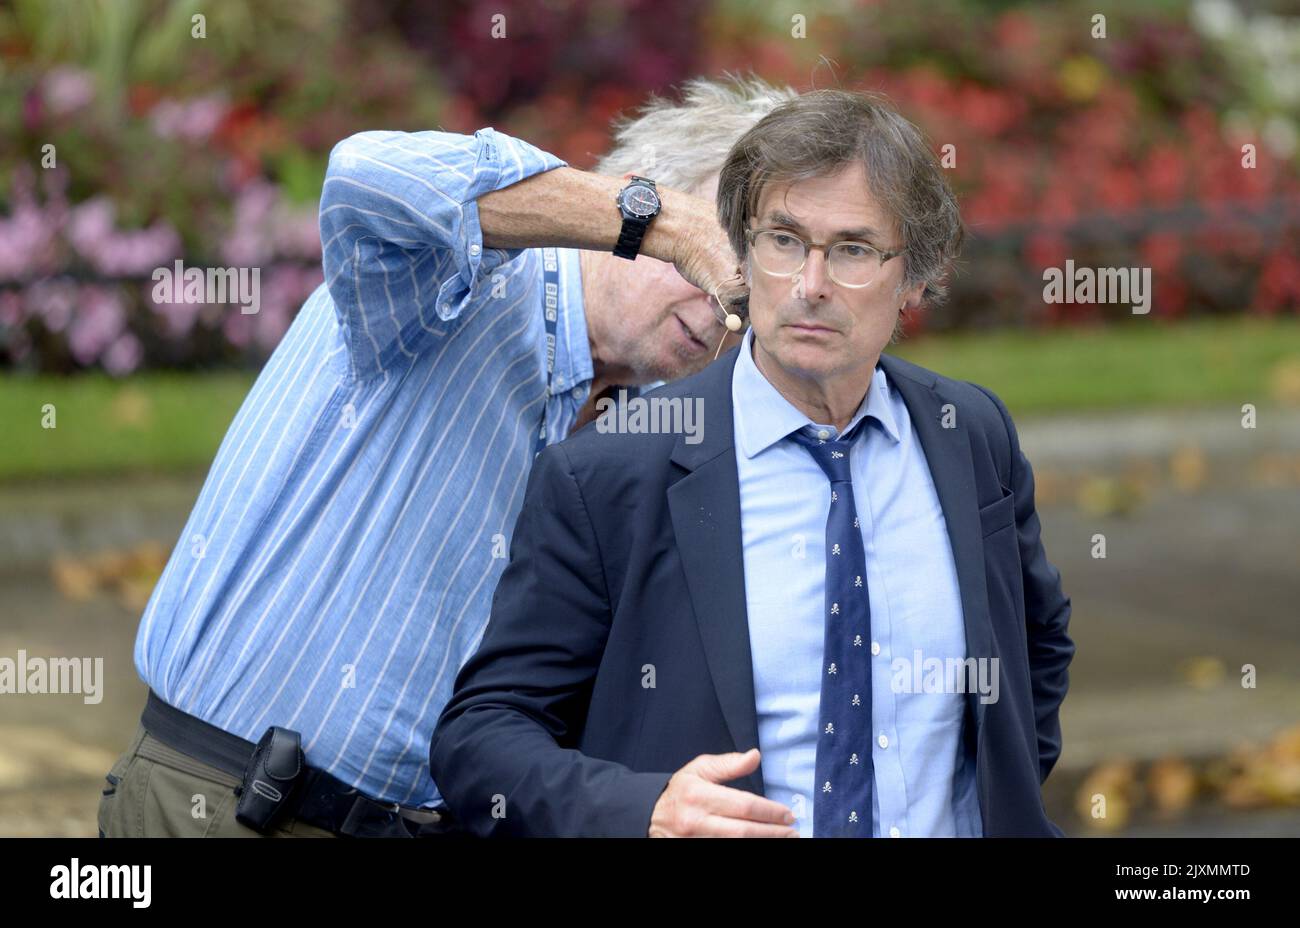 Robert Peston - Itv News political editor - having an earpiece fitted in Downing Street on the day Liz Truss makes her first speech as Prime Minister. Stock Photo